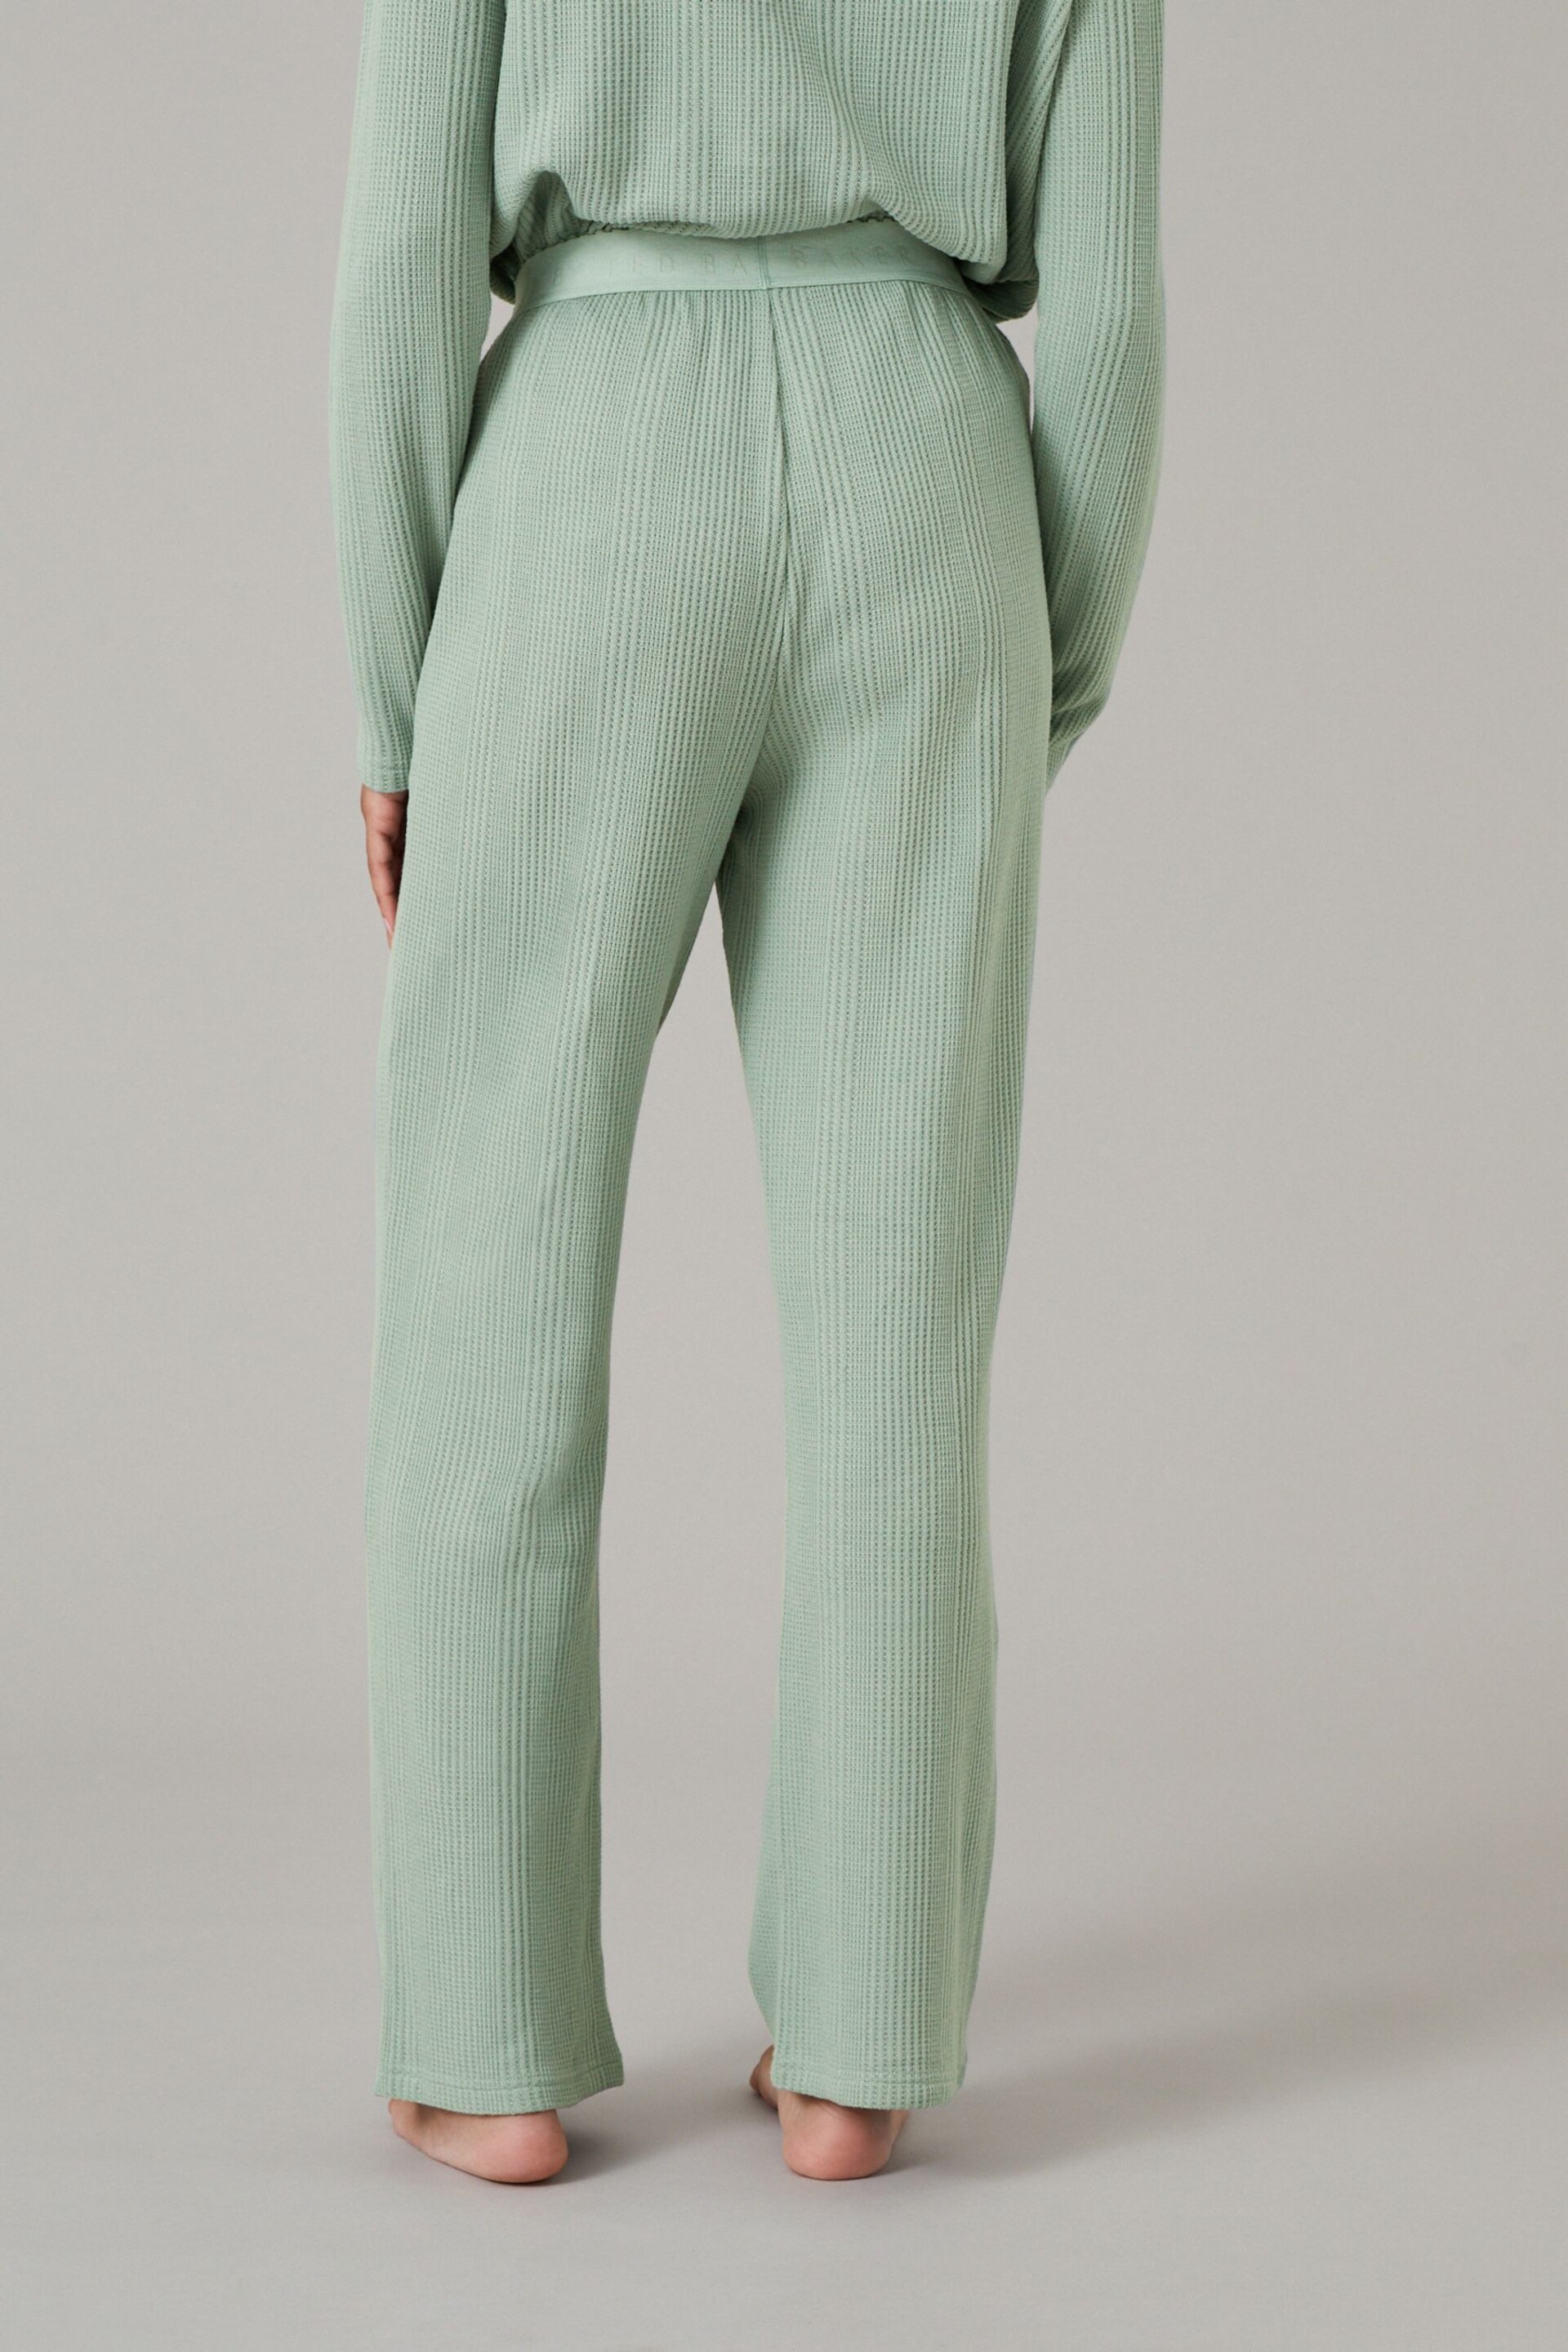 B by Ted Baker Waffle Lounge Wide Leg Trousers - Image 4 of 6